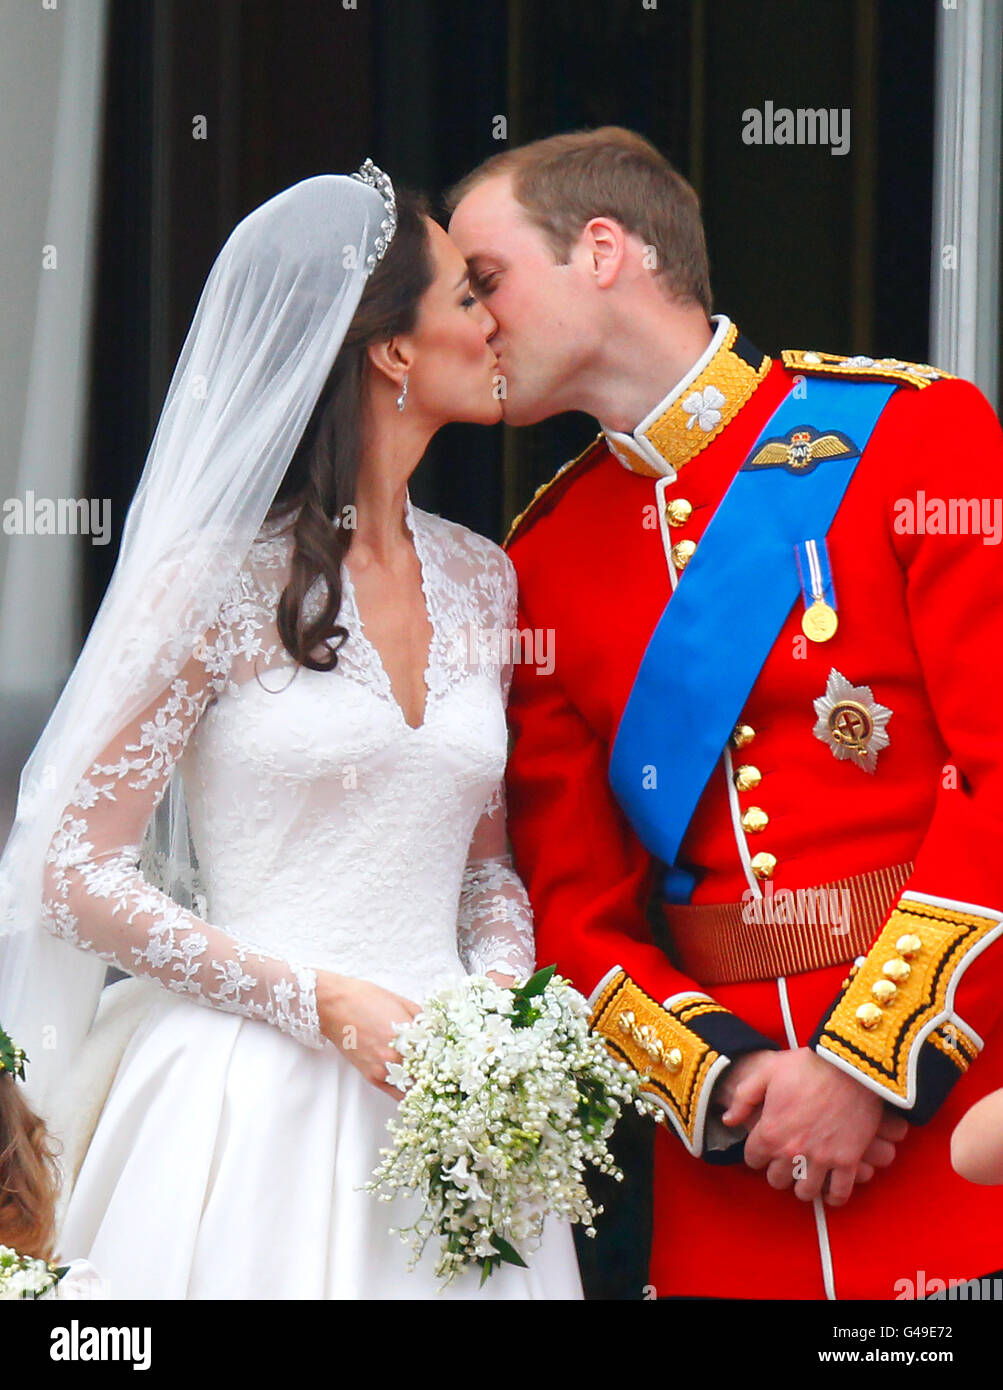 Prince William and his wife Kate Middleton, who has been given the title of  The Duchess of Cambridge, kiss on the balcony of Buckingham Palace, London,  following their wedding at Westminster Abbey